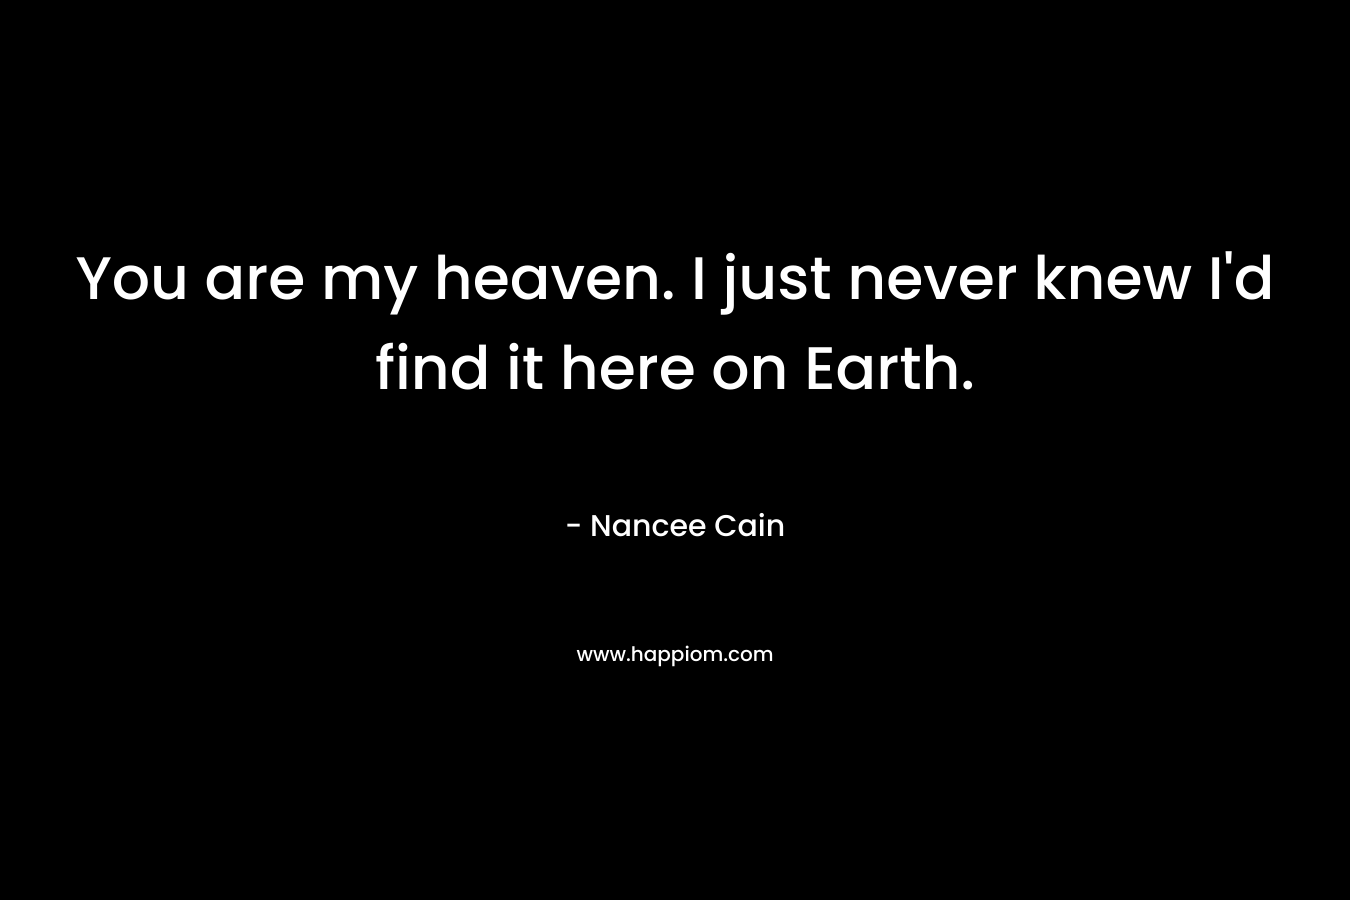 You are my heaven. I just never knew I’d find it here on Earth. – Nancee Cain